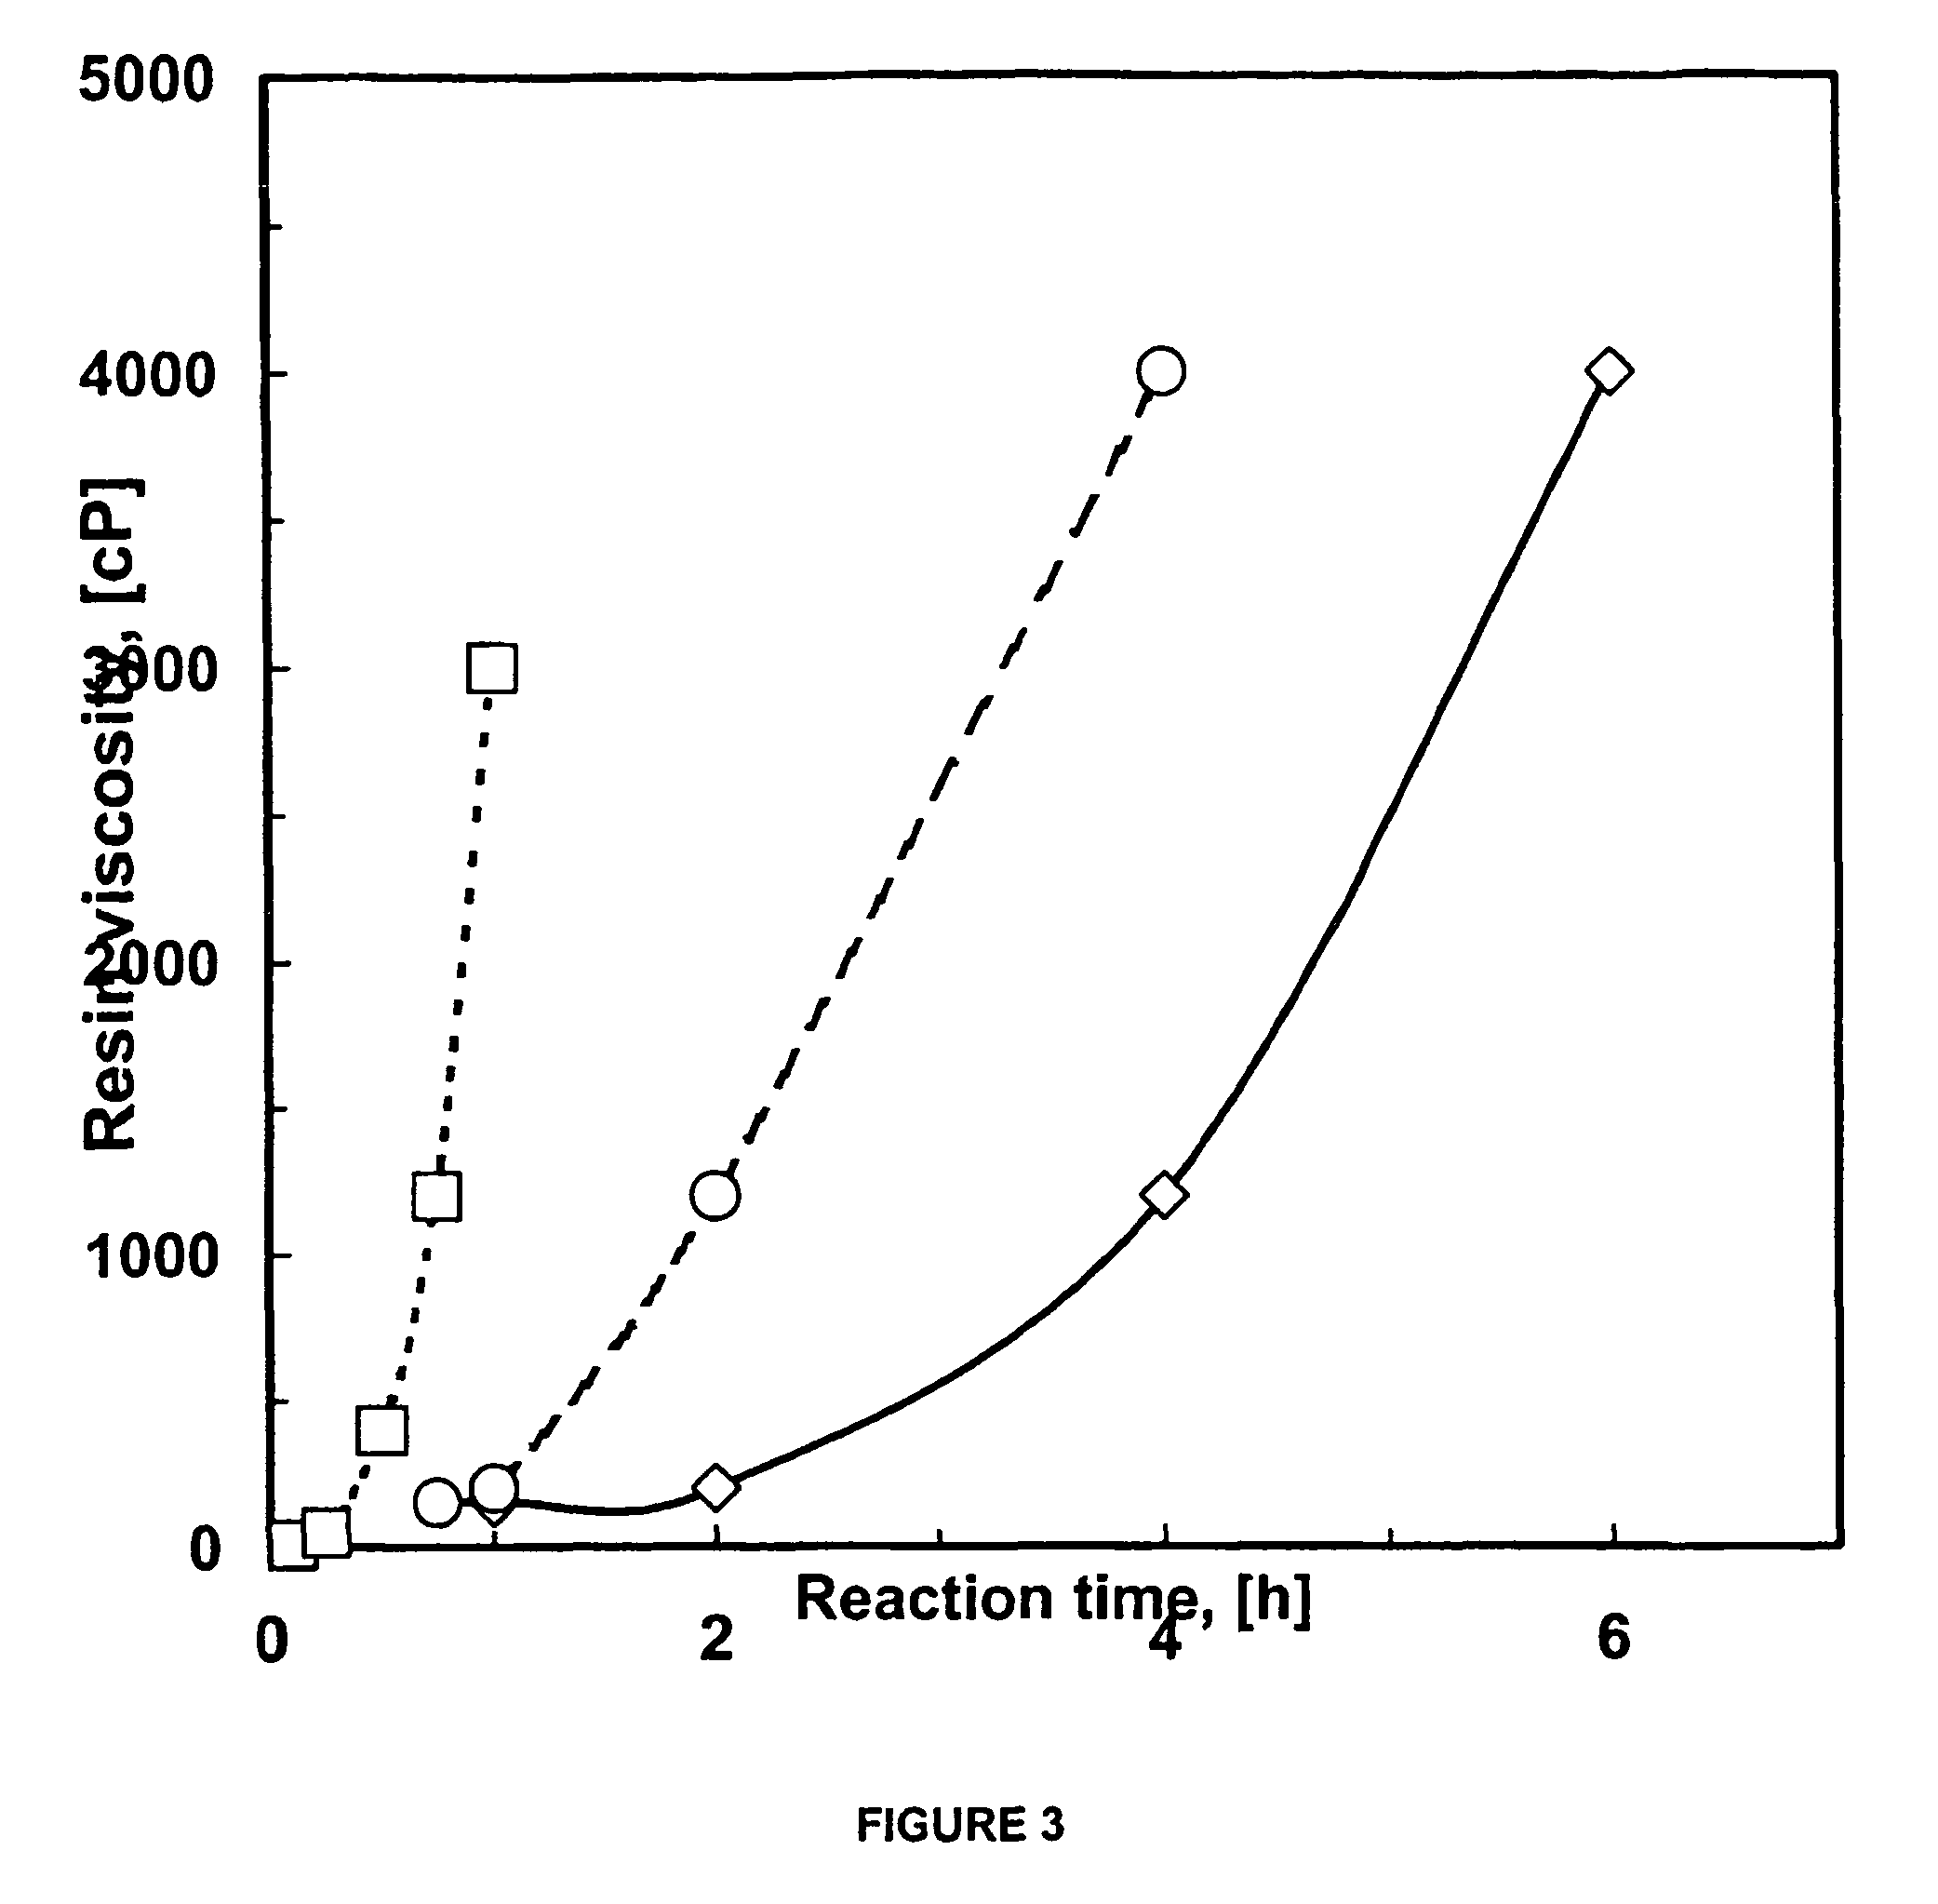 Binder composition and method for treating particulate material